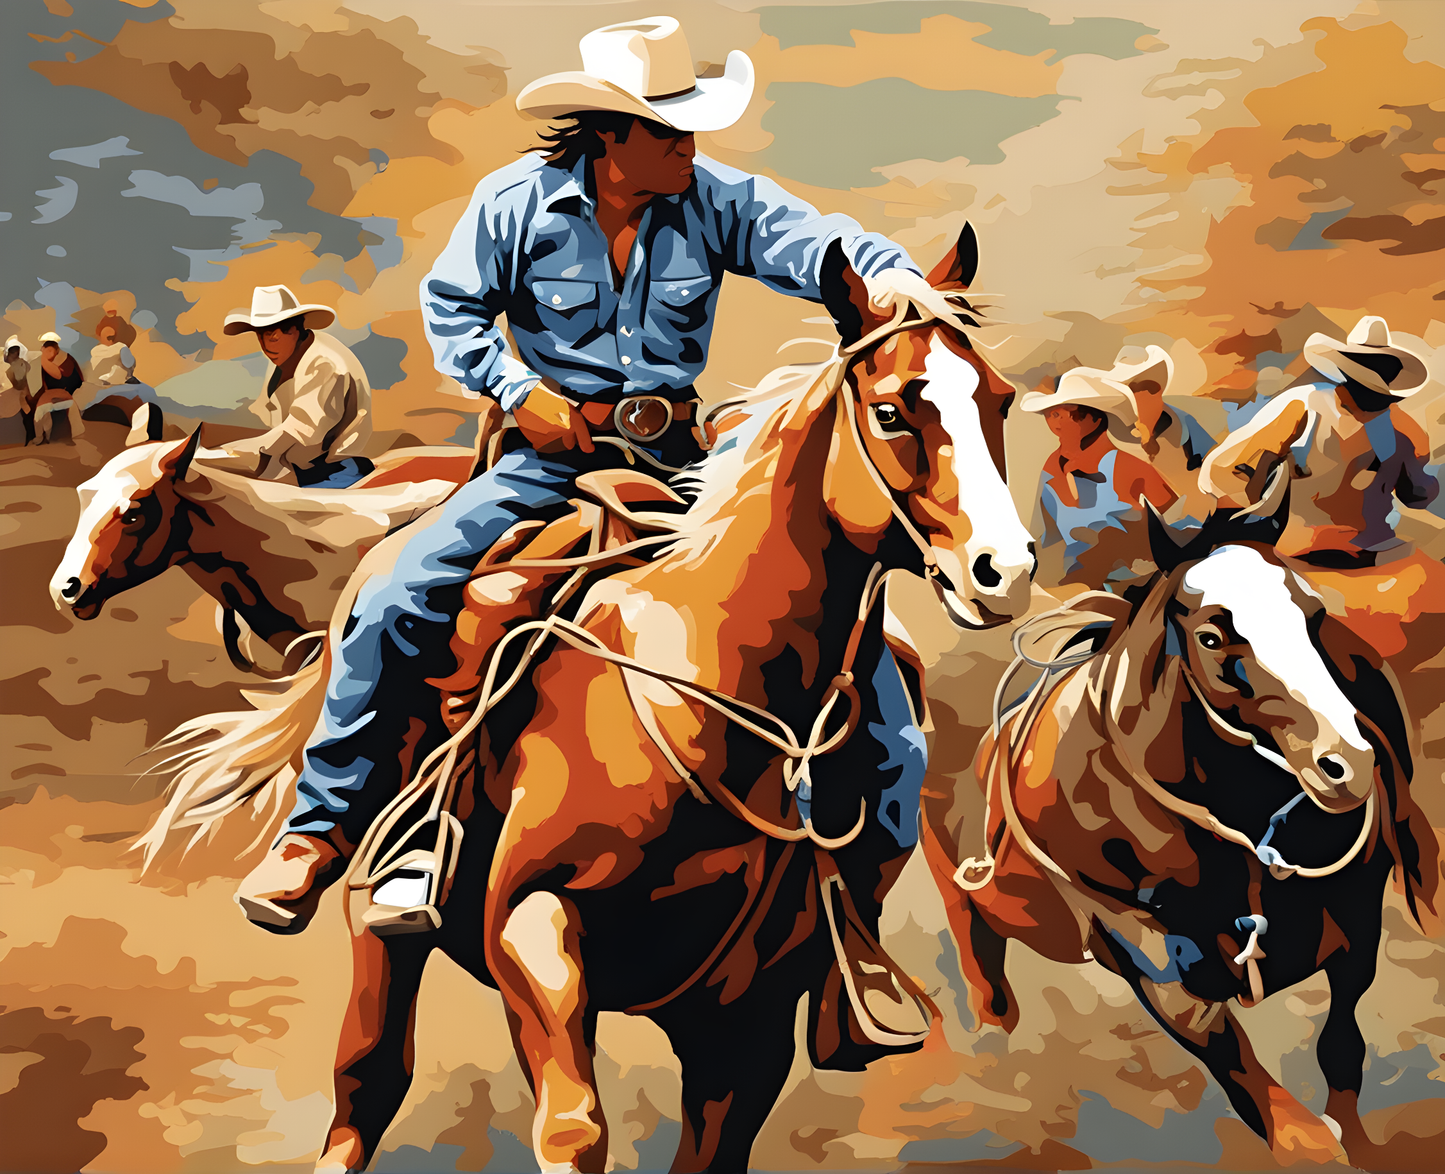 Rodeo (1) - Van-Go Paint-By-Number Kit